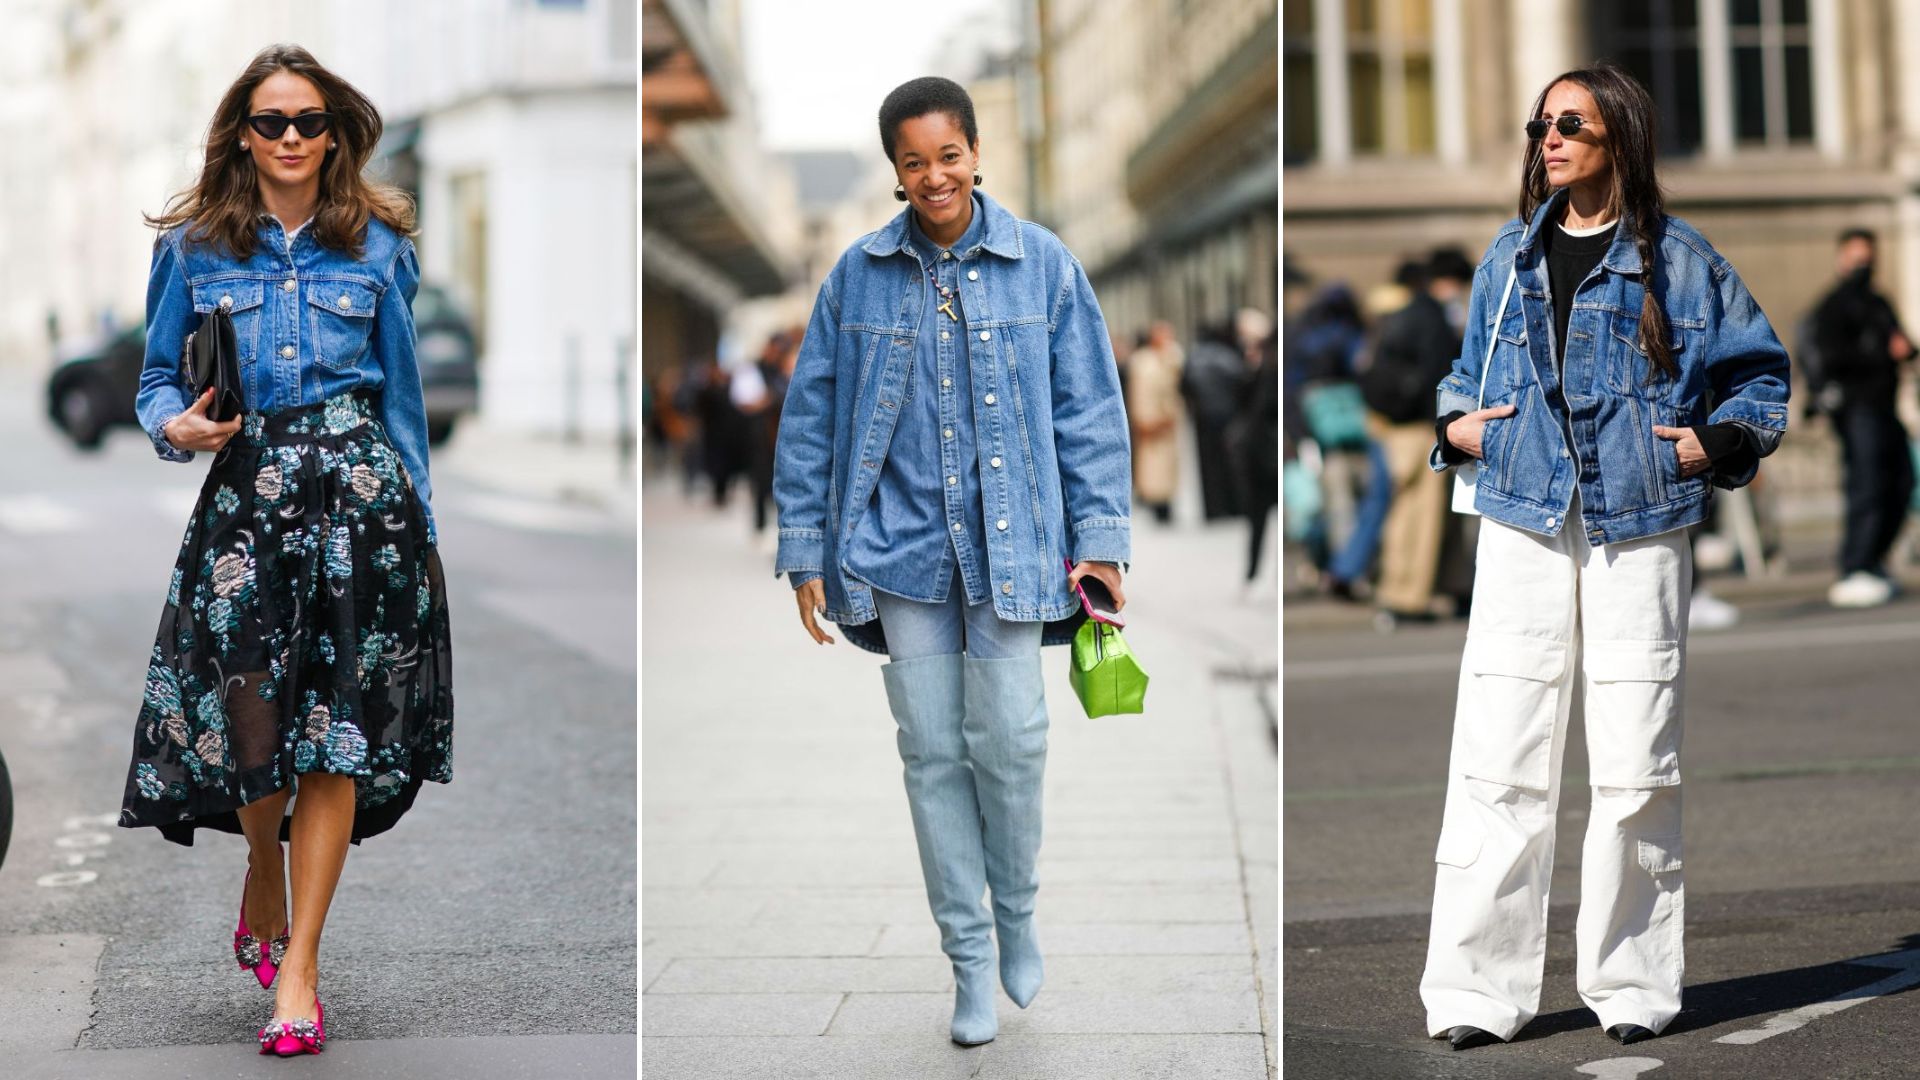 How to Wear a Denim Jacket: The 2018 Rules for Looking Good | Who What Wear